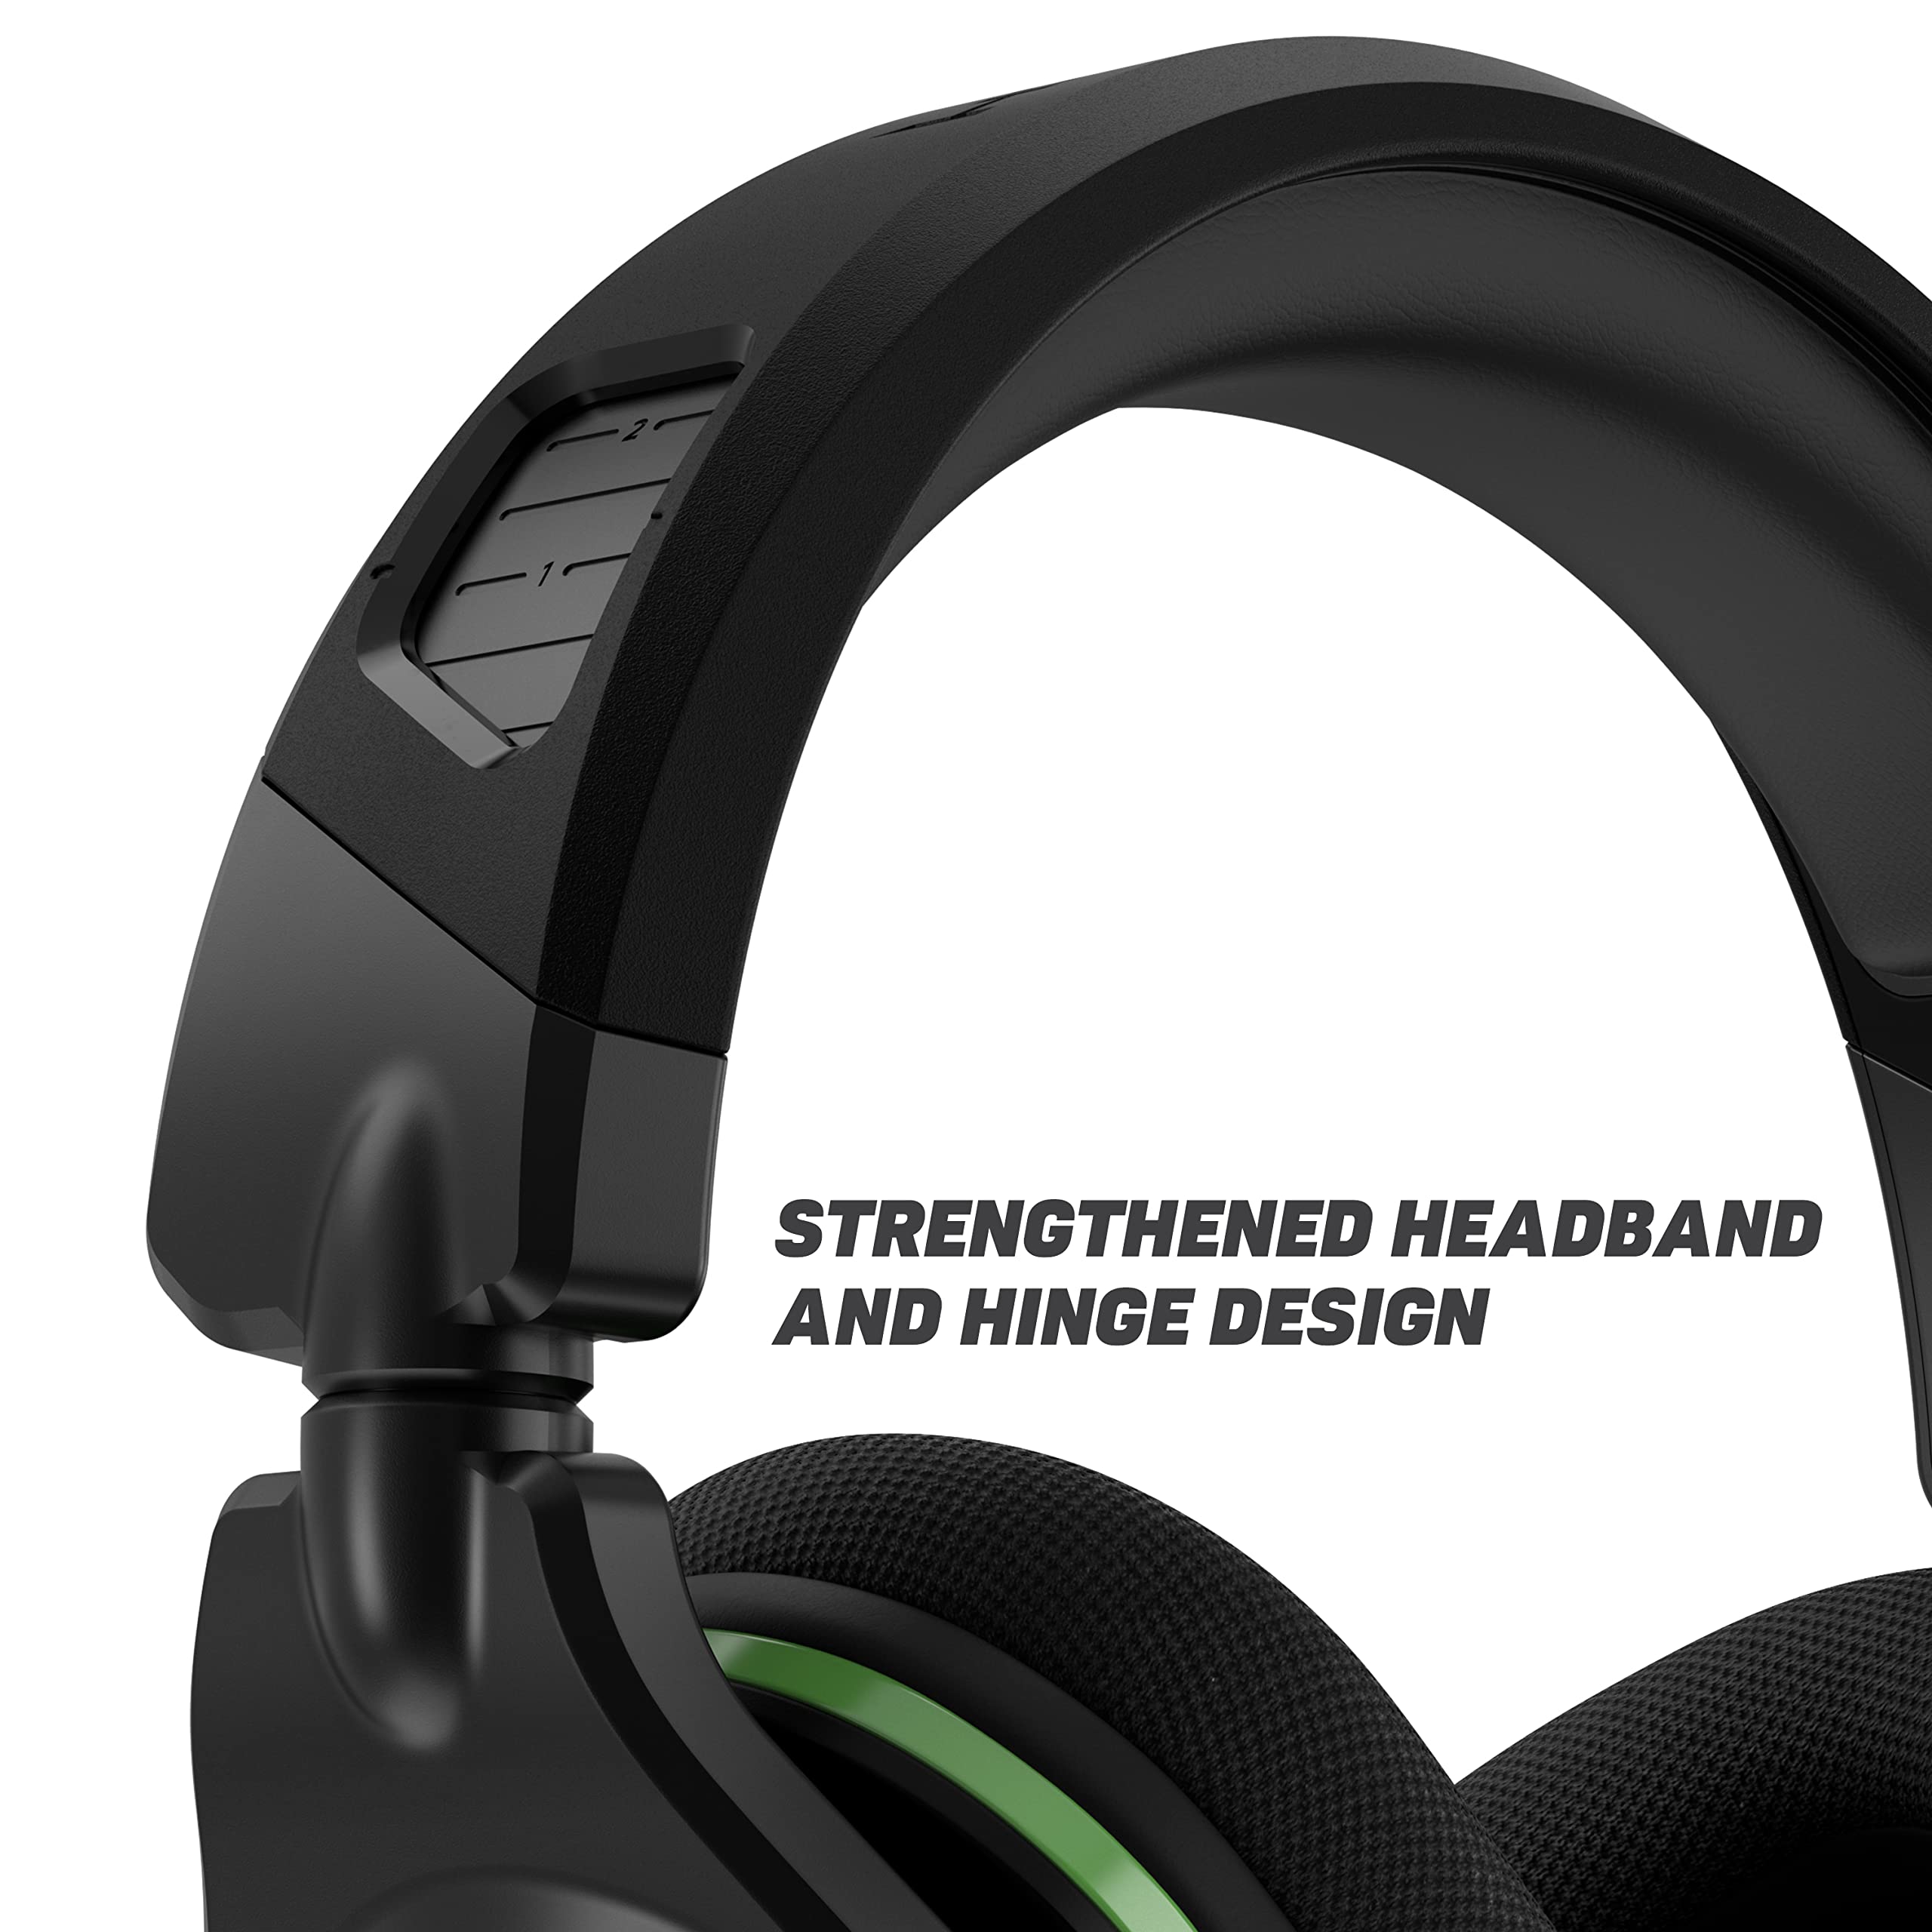 Turtle Beach Stealth 600 Gen 2 USB Wireless Amplified Gaming Headset - Licensed for Xbox Series X|S & Xbox One - 24+ Hour Battery, 50mm Speakers, Flip-to-Mute Mic, Spatial Audio – Black (Renewed)